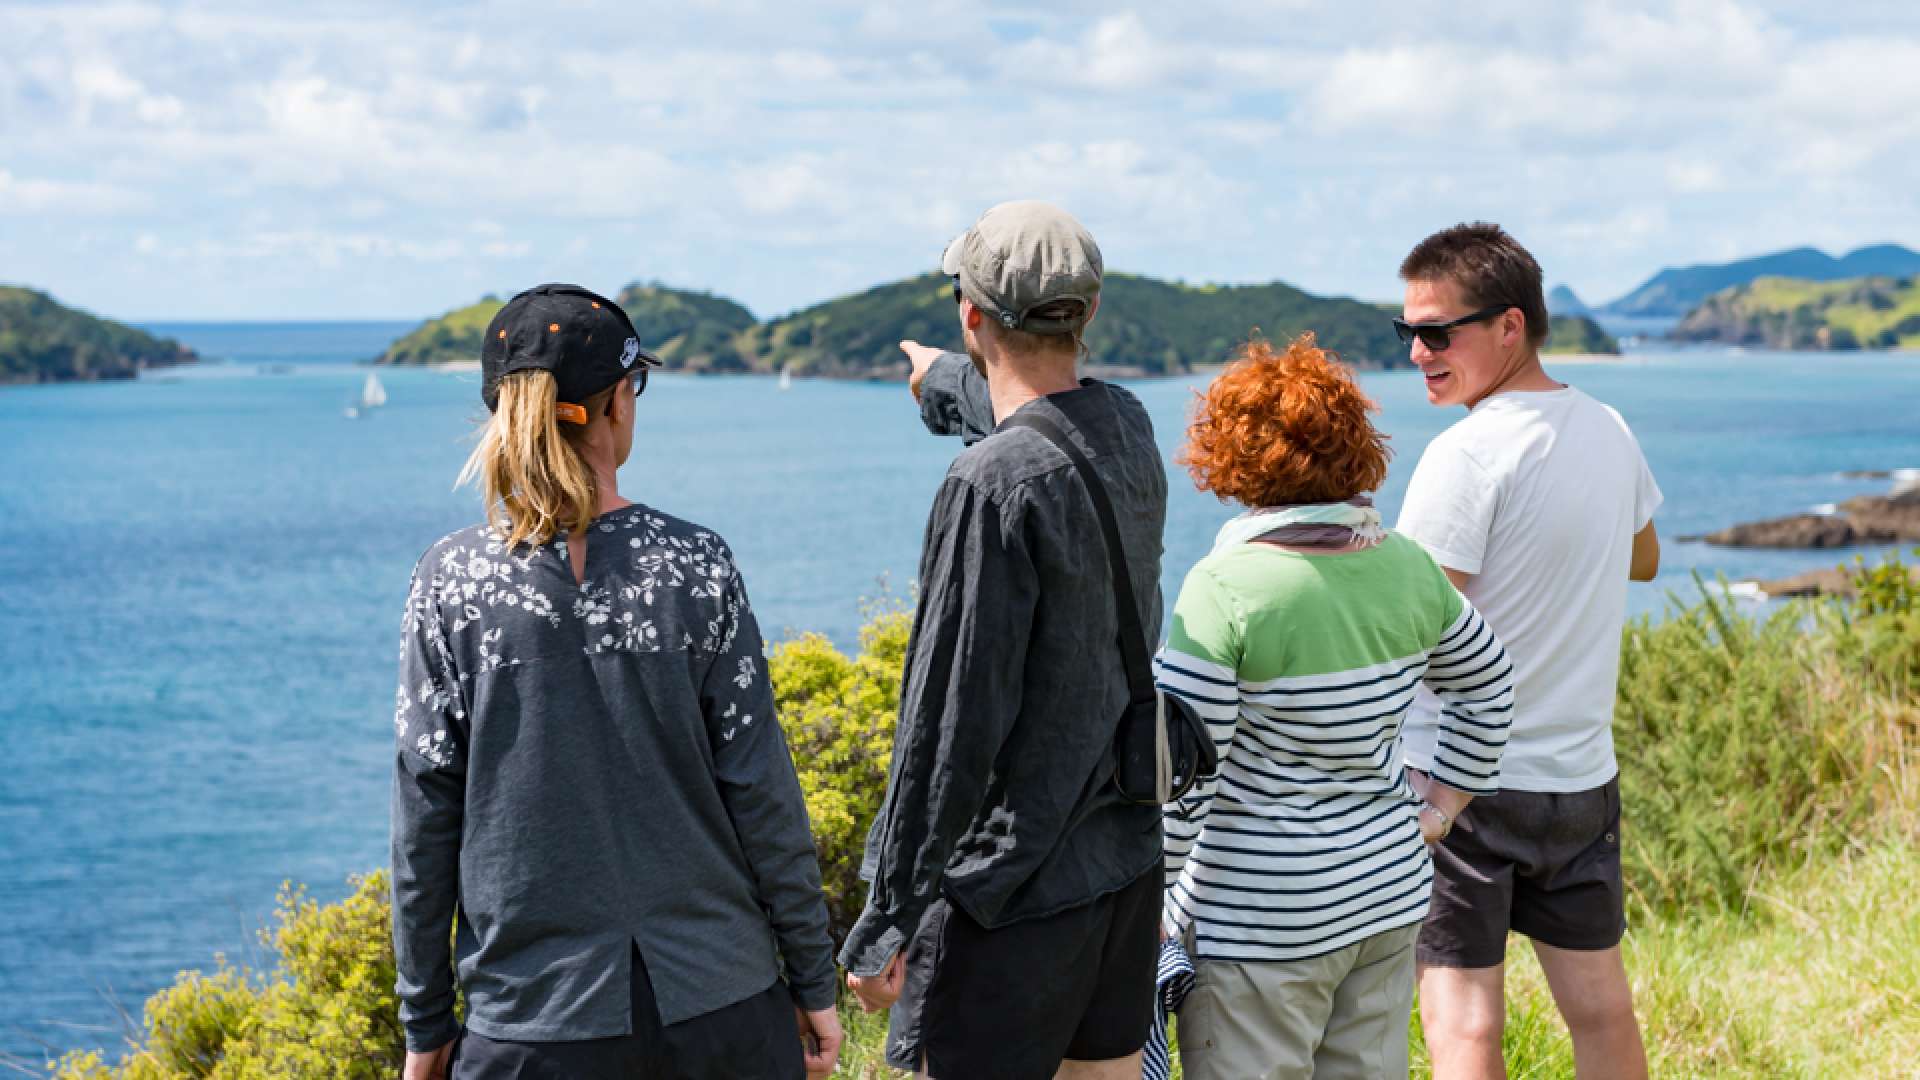 Visit the Bay of Islands on a Day Sailing Adventure visiting Islands and Bays